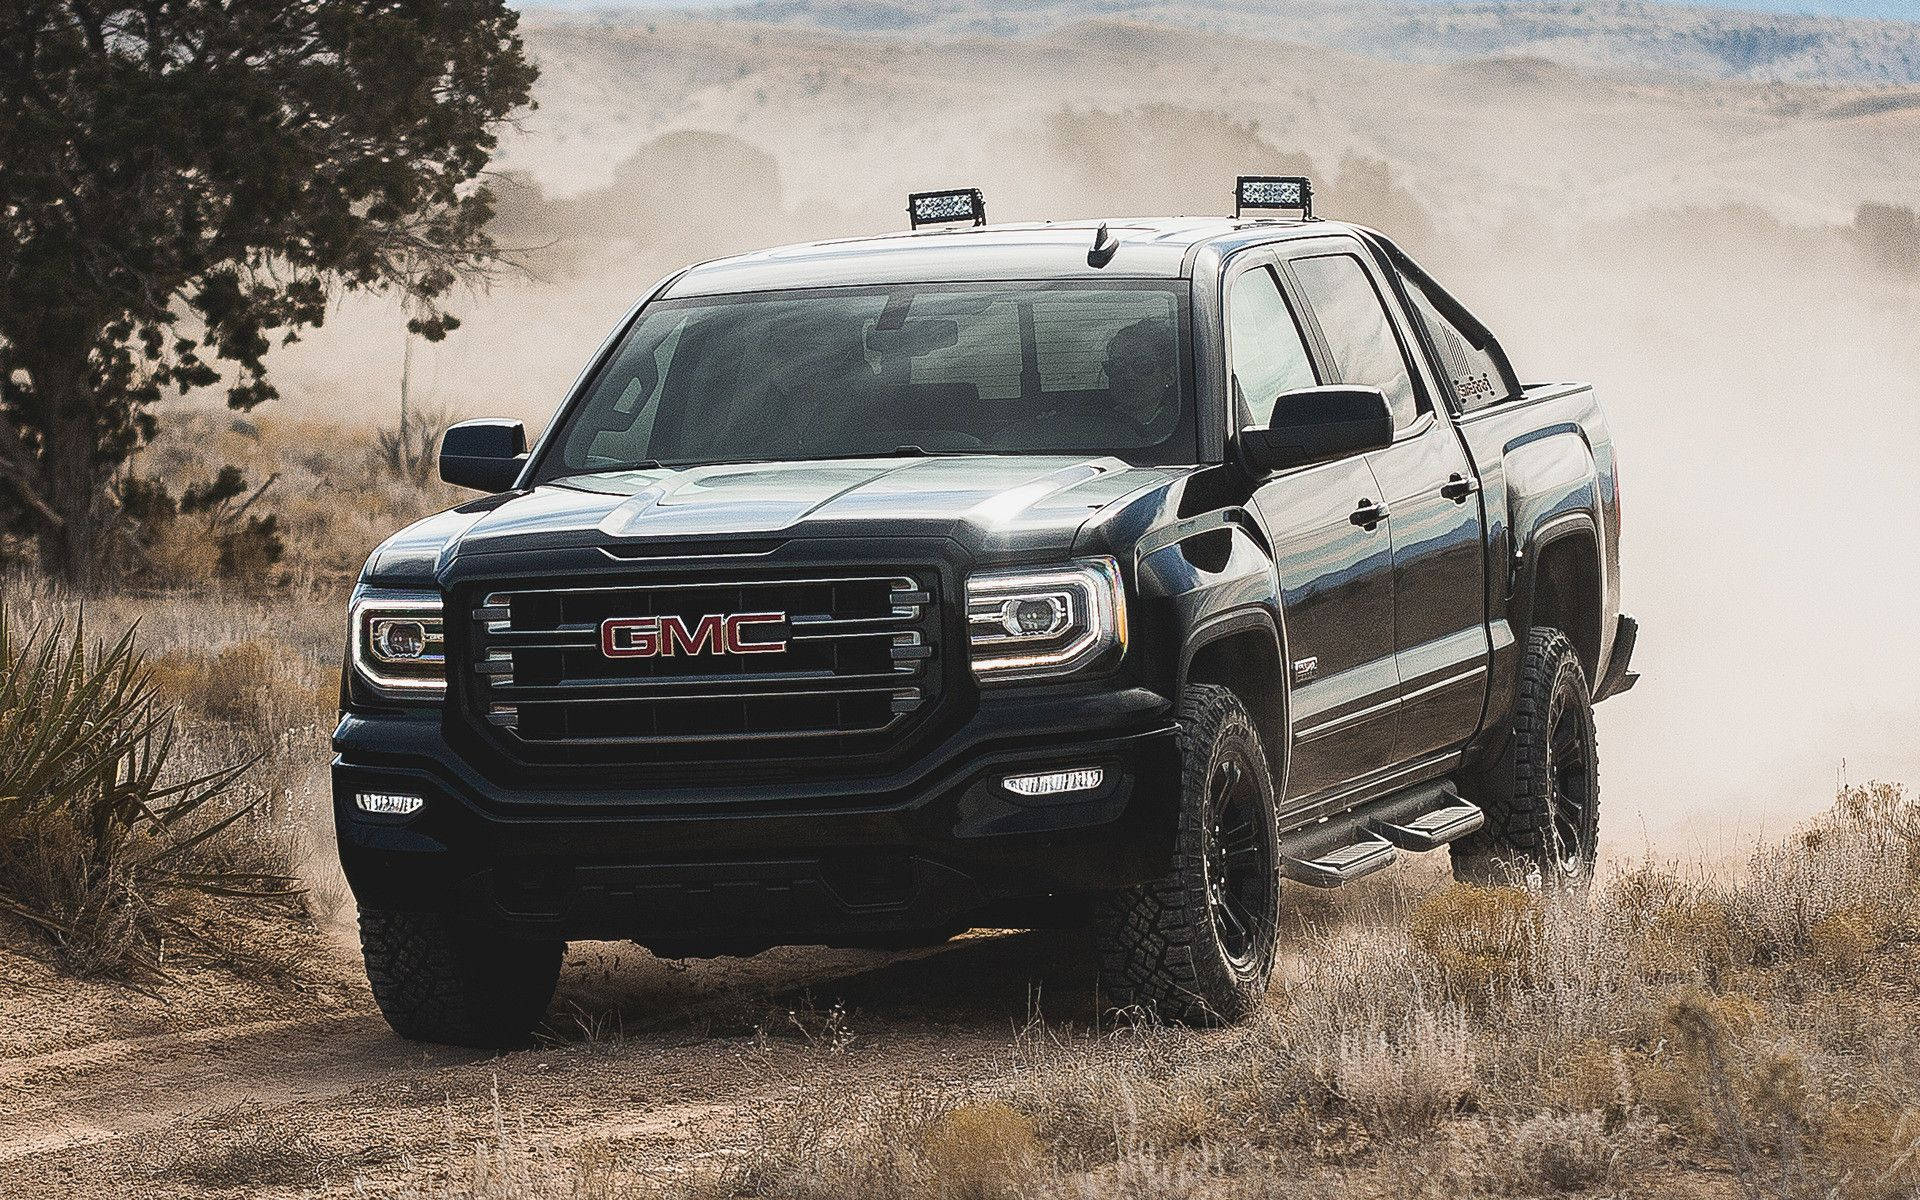 Gmc In A Sandy Area